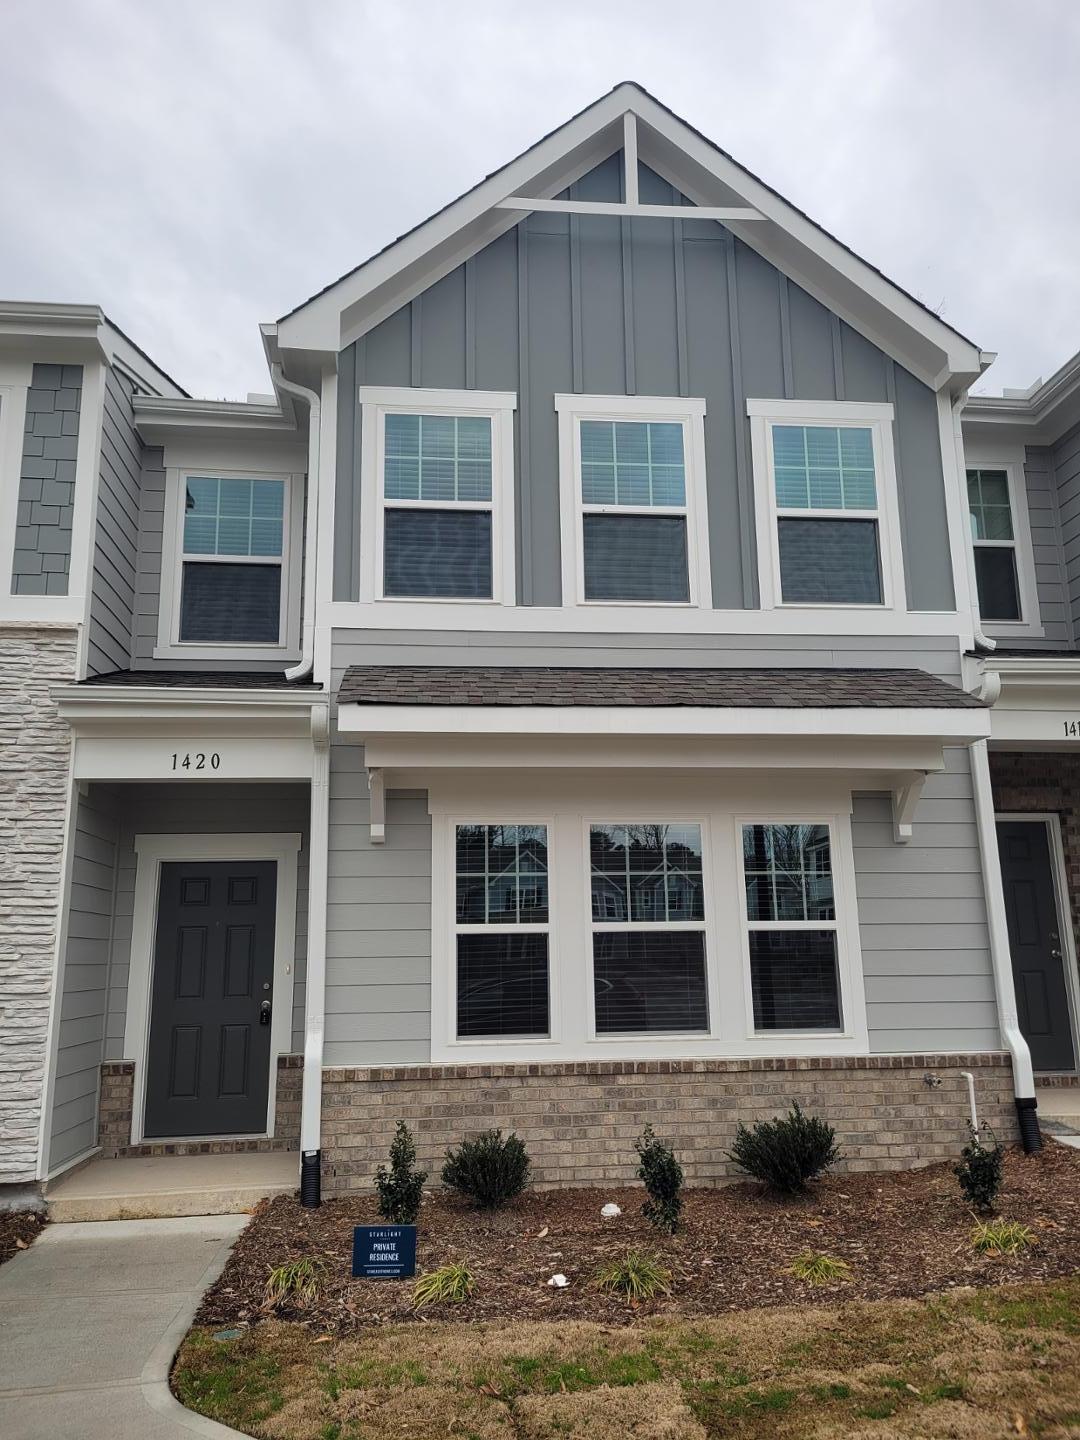 View Wake Forest, NC 27587 townhome